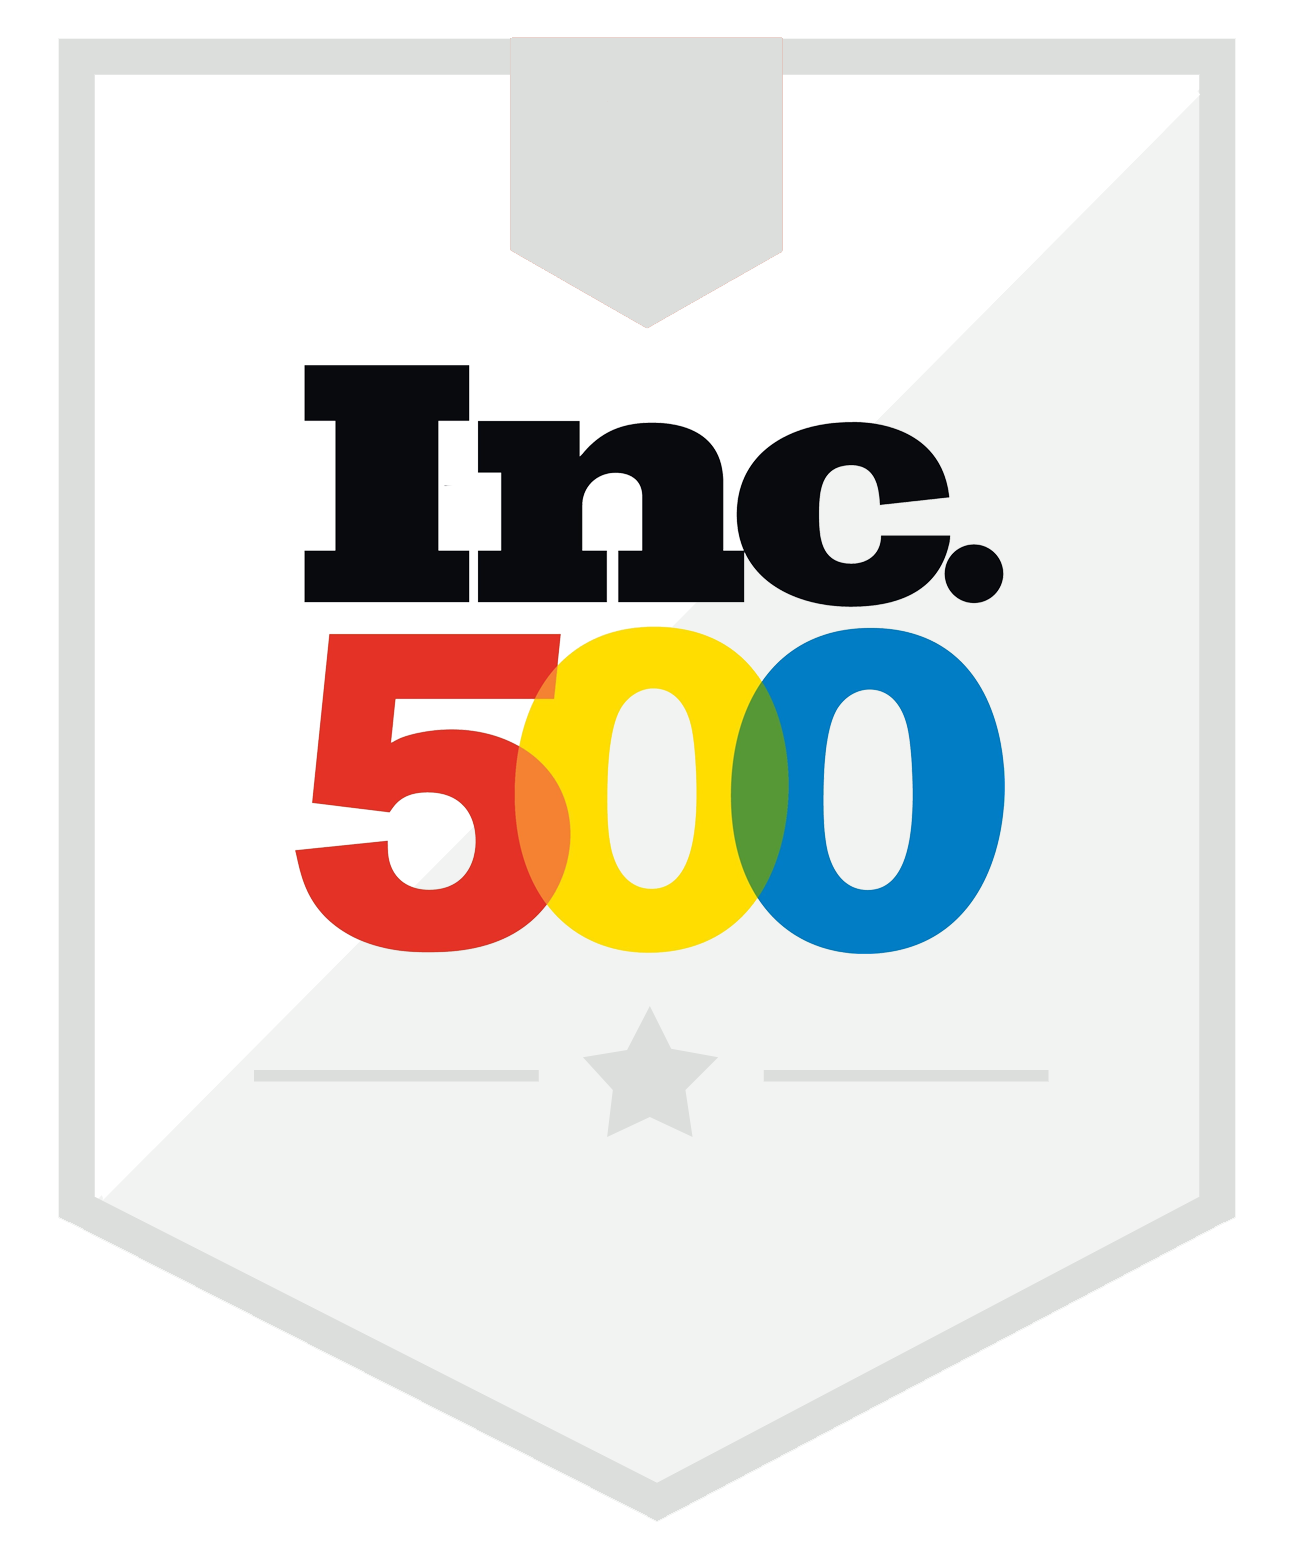 Complete CRM is a Inc 500 Company